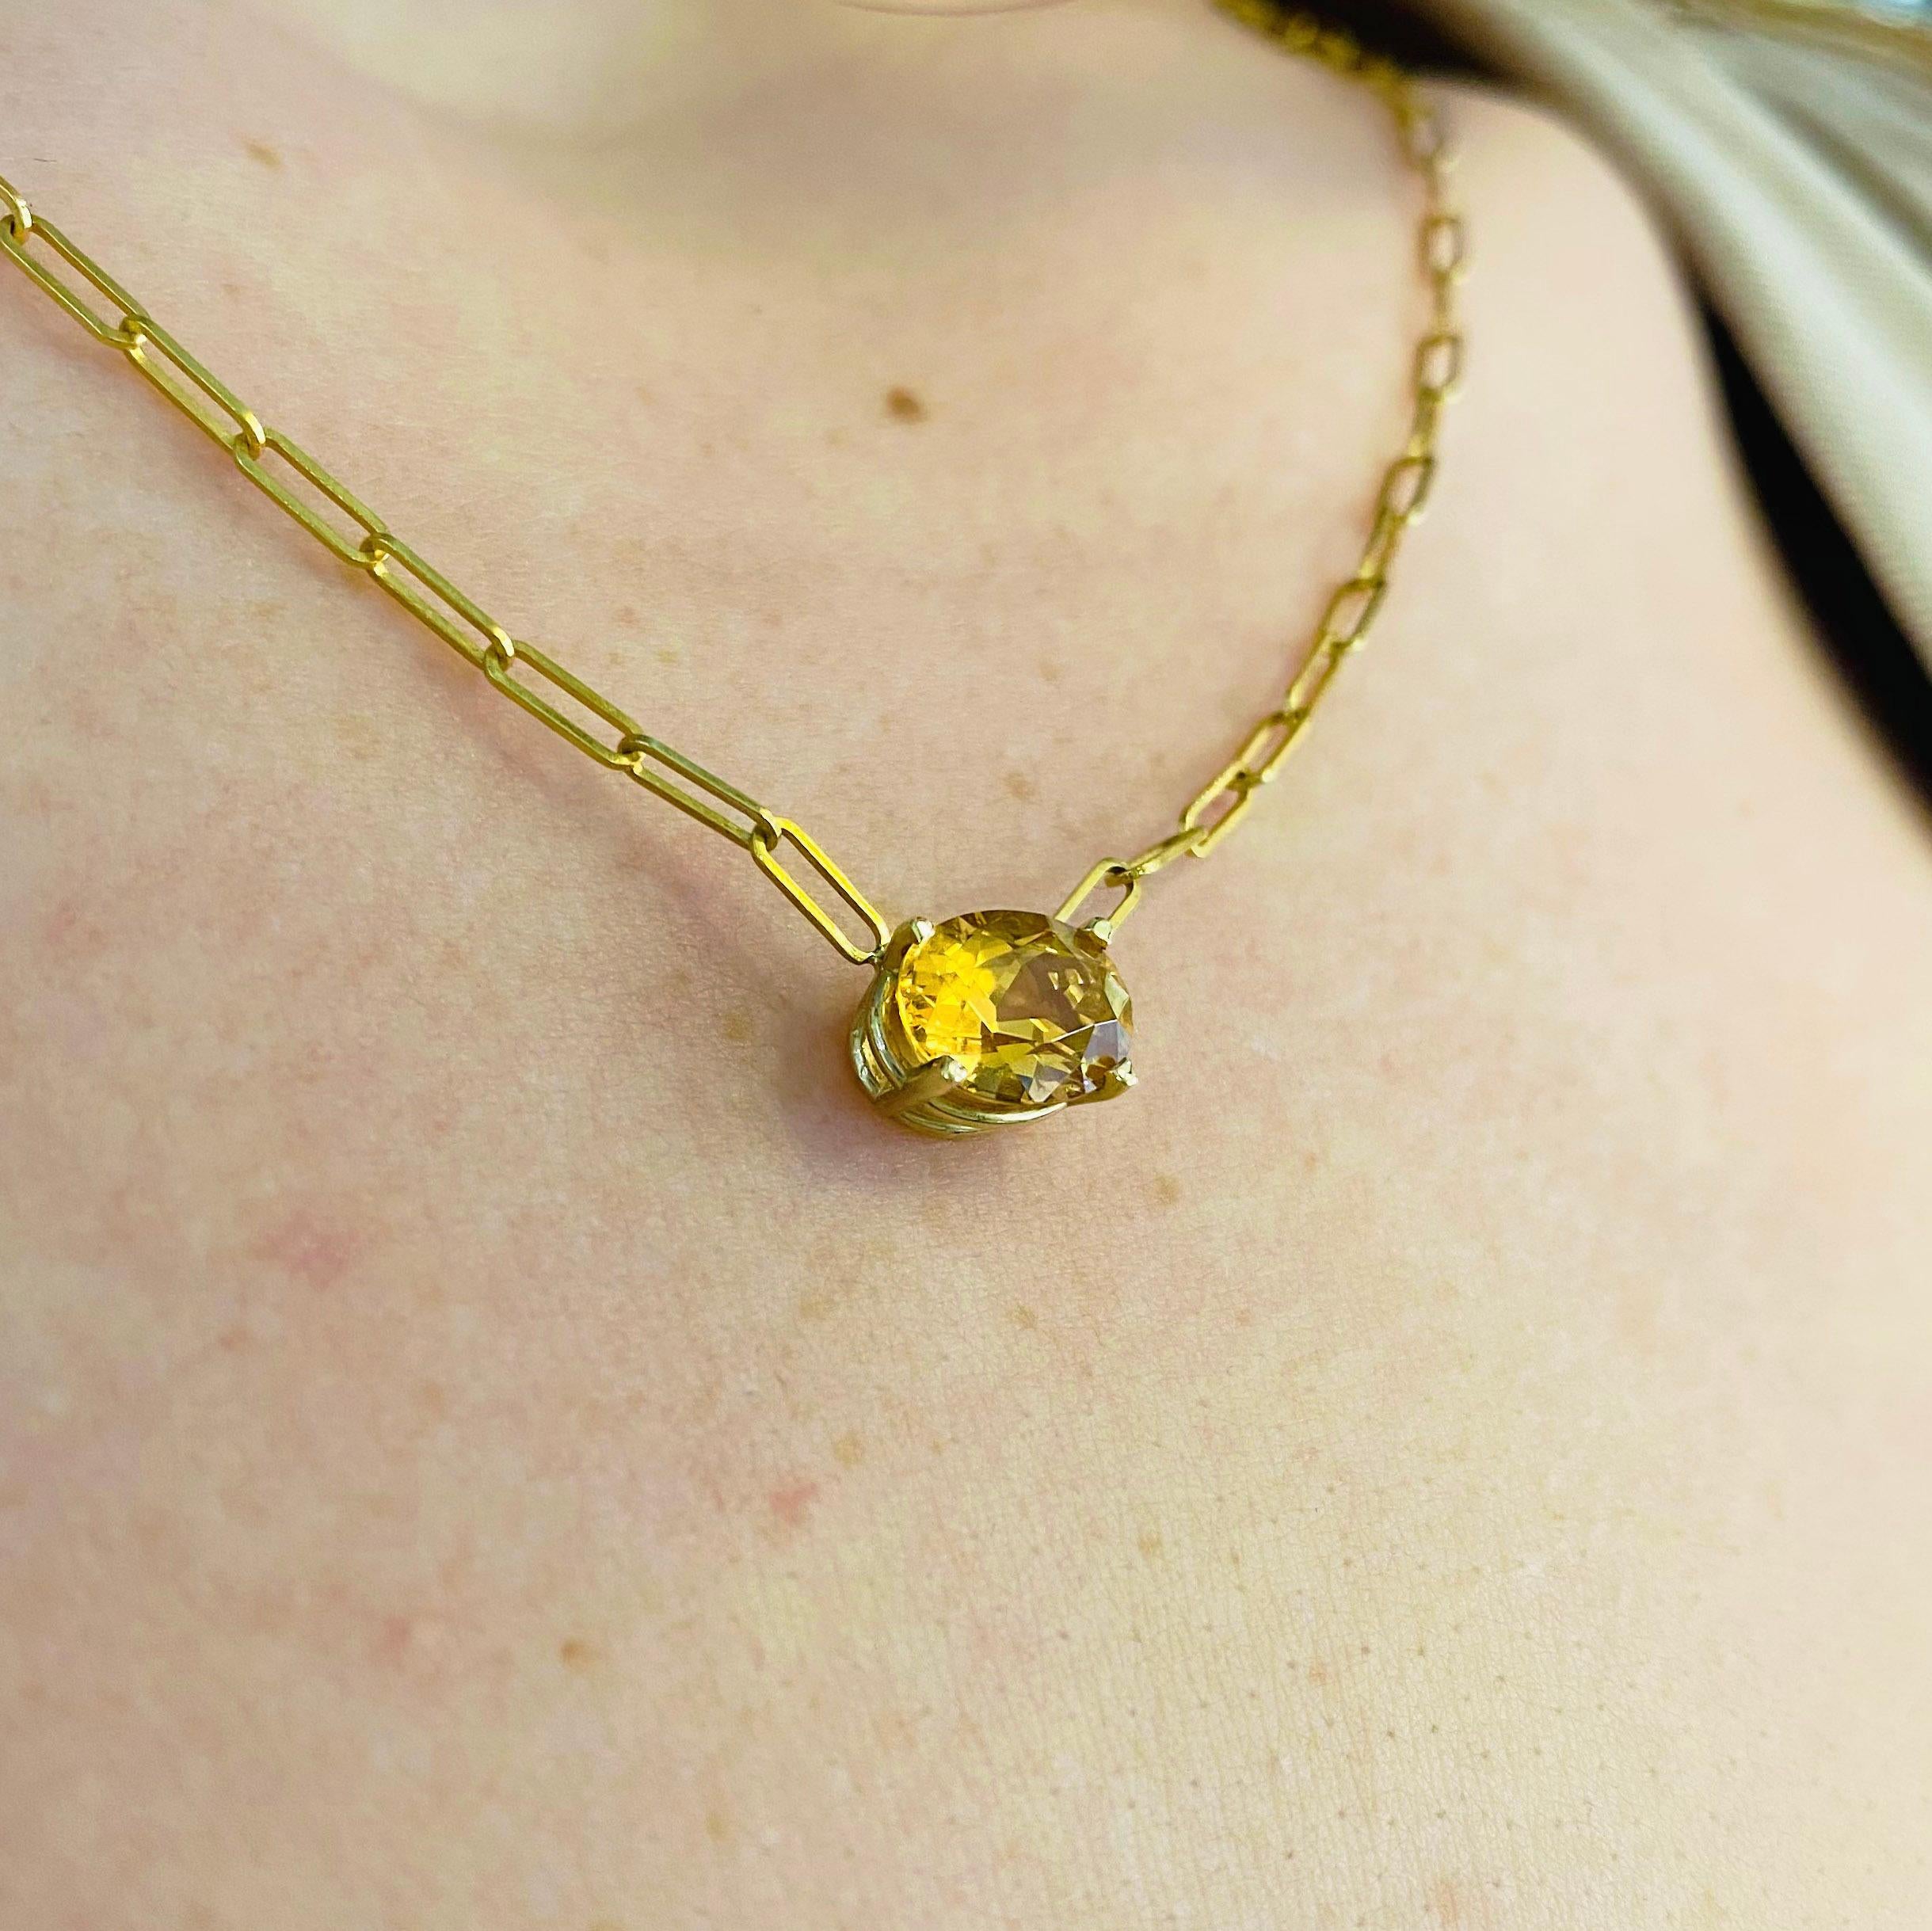 This gorgeous citrine pendant gracing a stylish 14k gold paperclip chain is sure to put a smile on anyone's face! This necklace looks beautiful worn by itself and also looks wonderful in a necklace stack. This necklace would make a wonderful gift